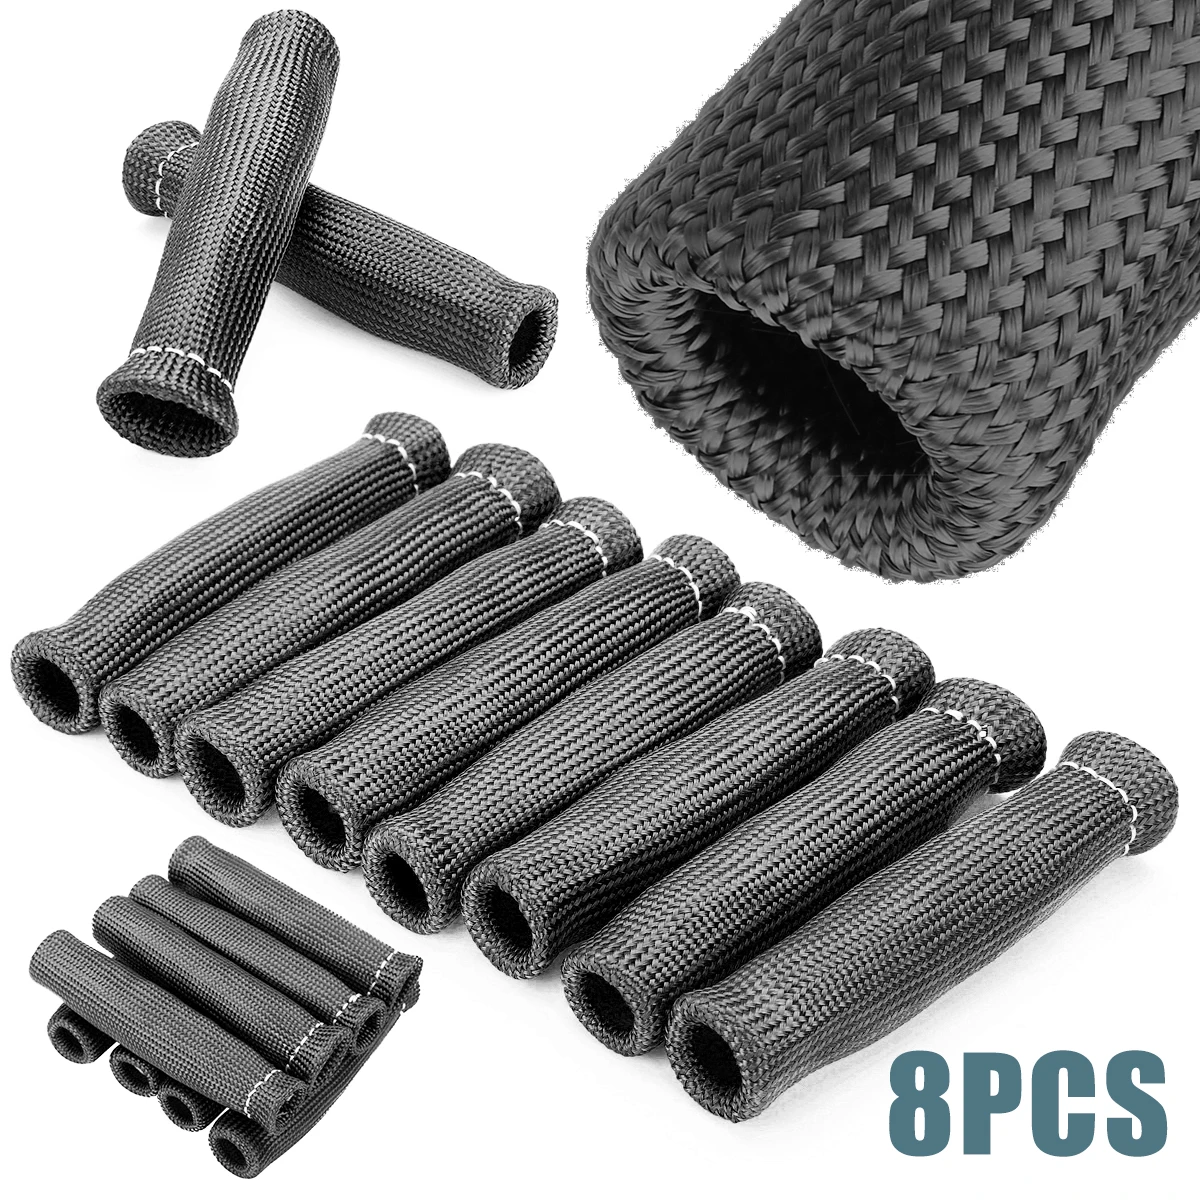 Black 8 Pack Spark Plug Boots Protector Heat Shield Sleeve Cover 2500 Degree High Temperature 